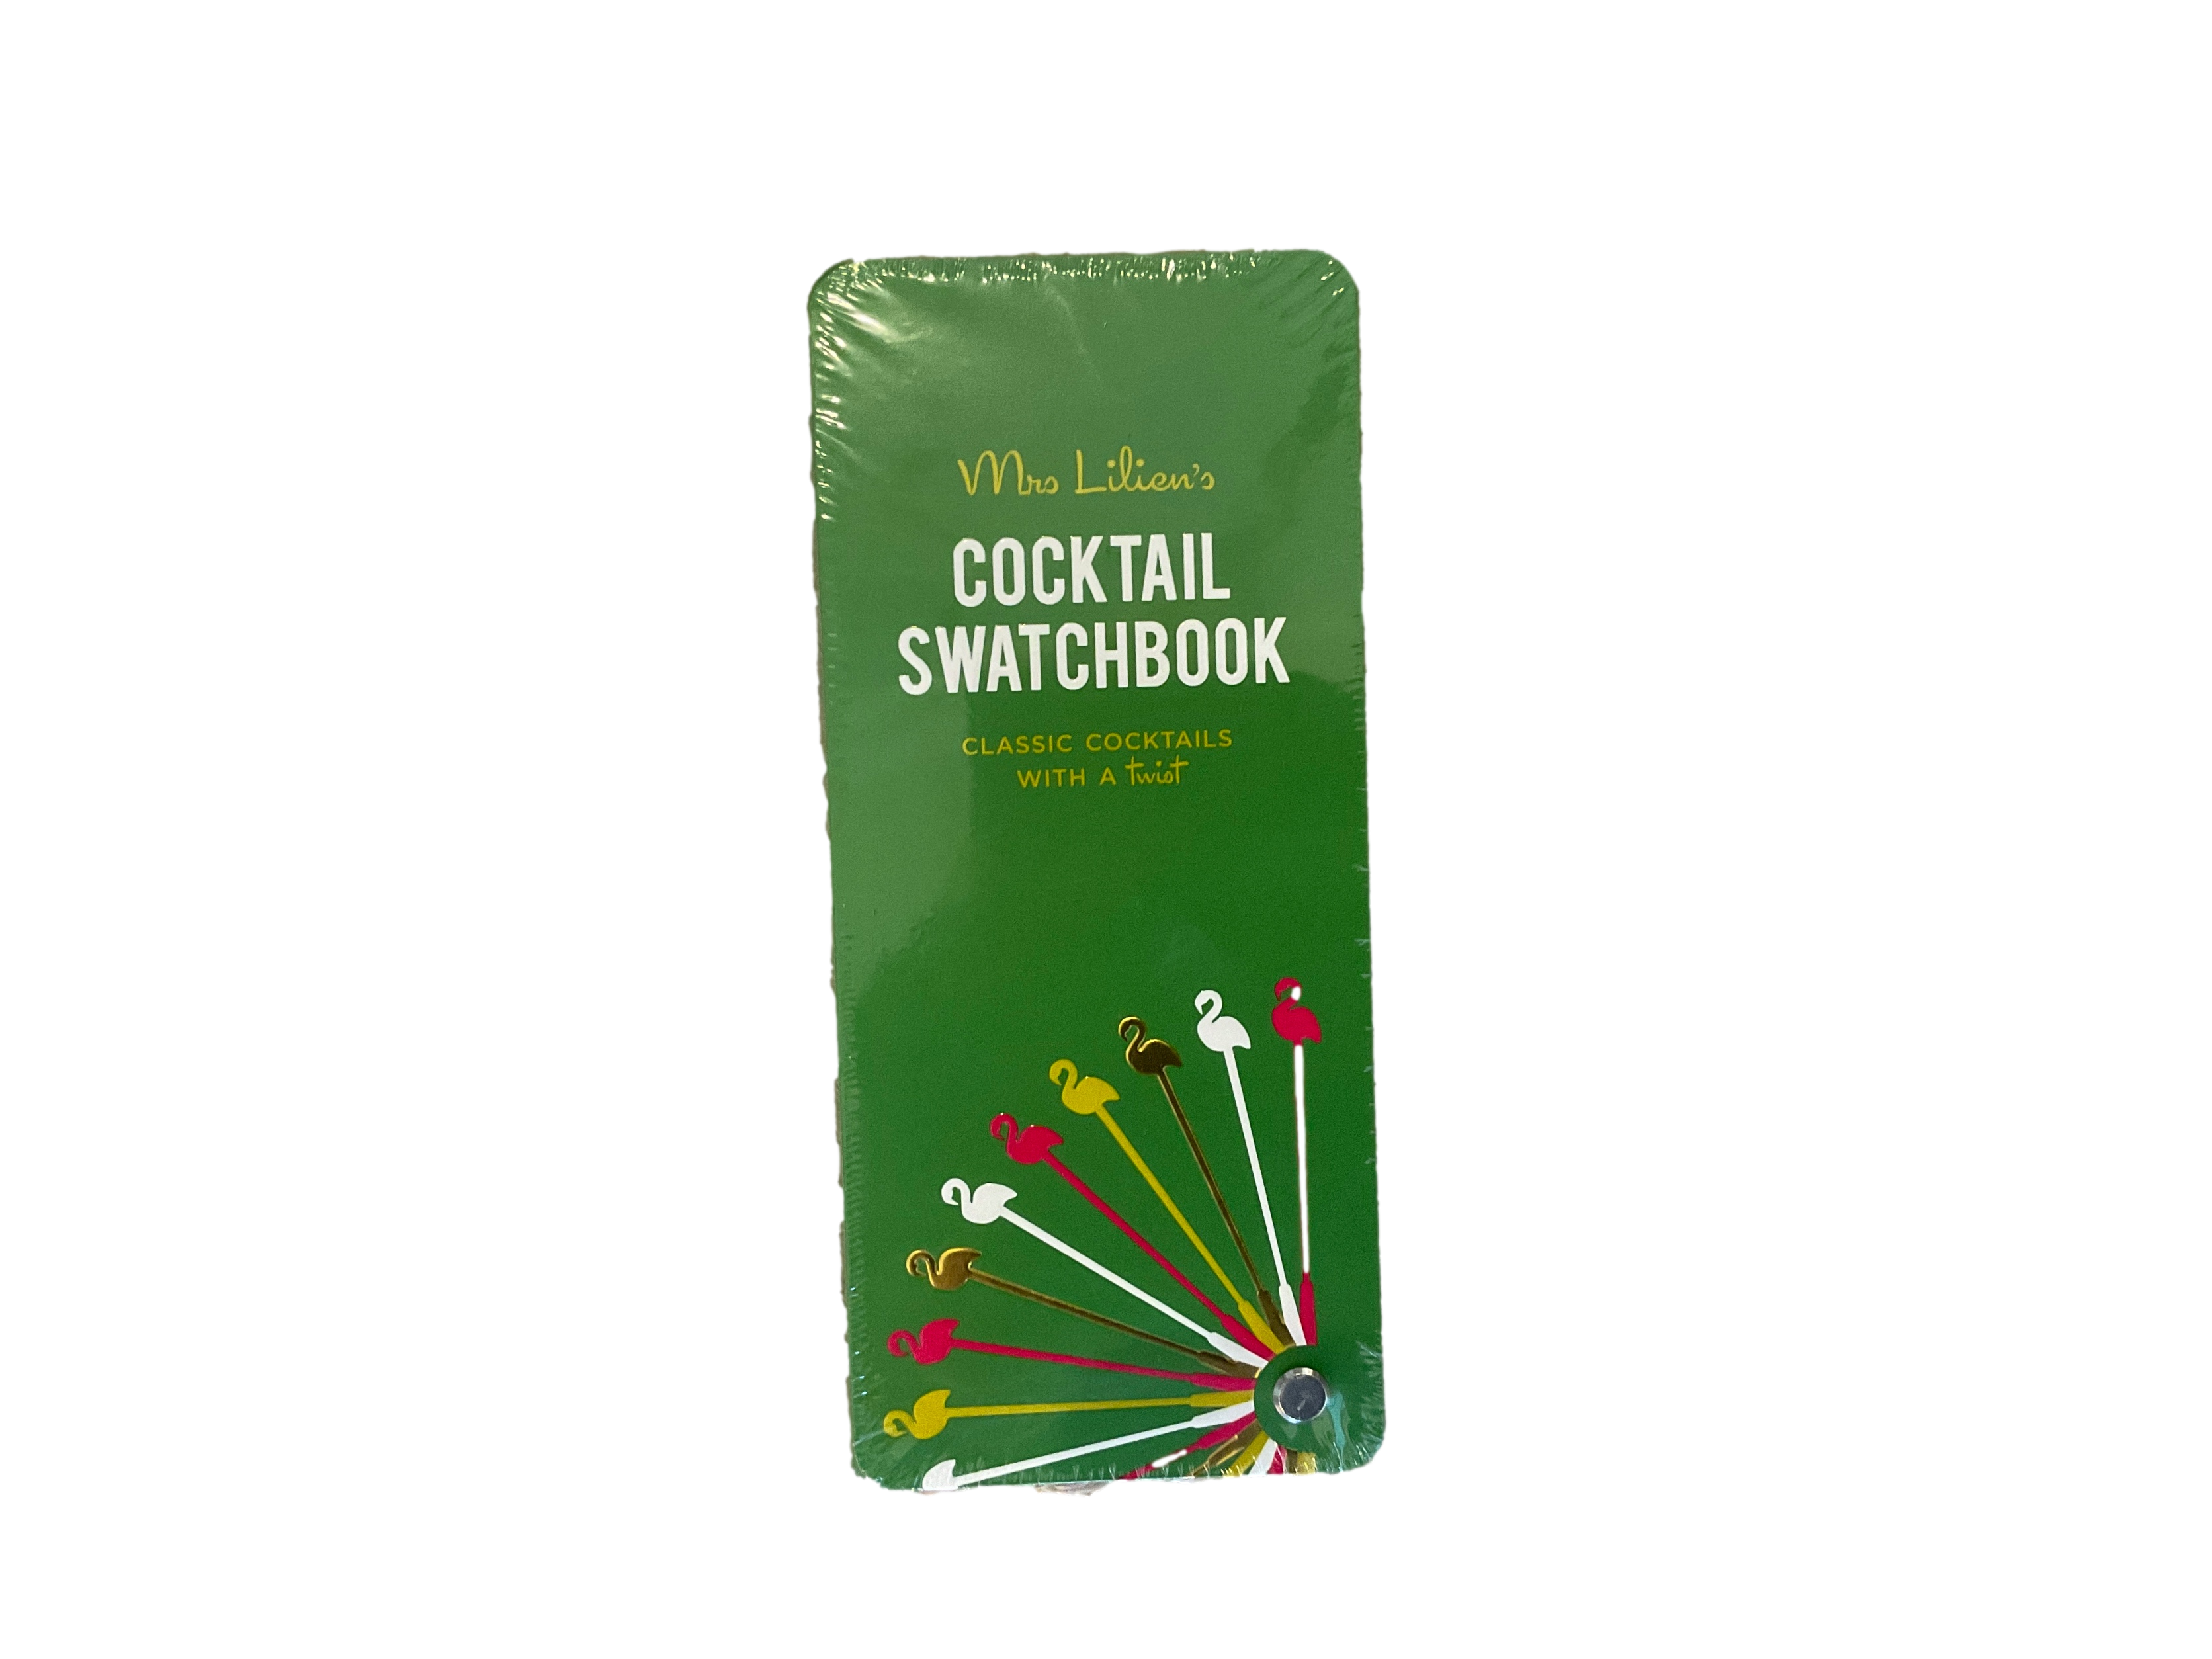 Cocktail Swatchbook